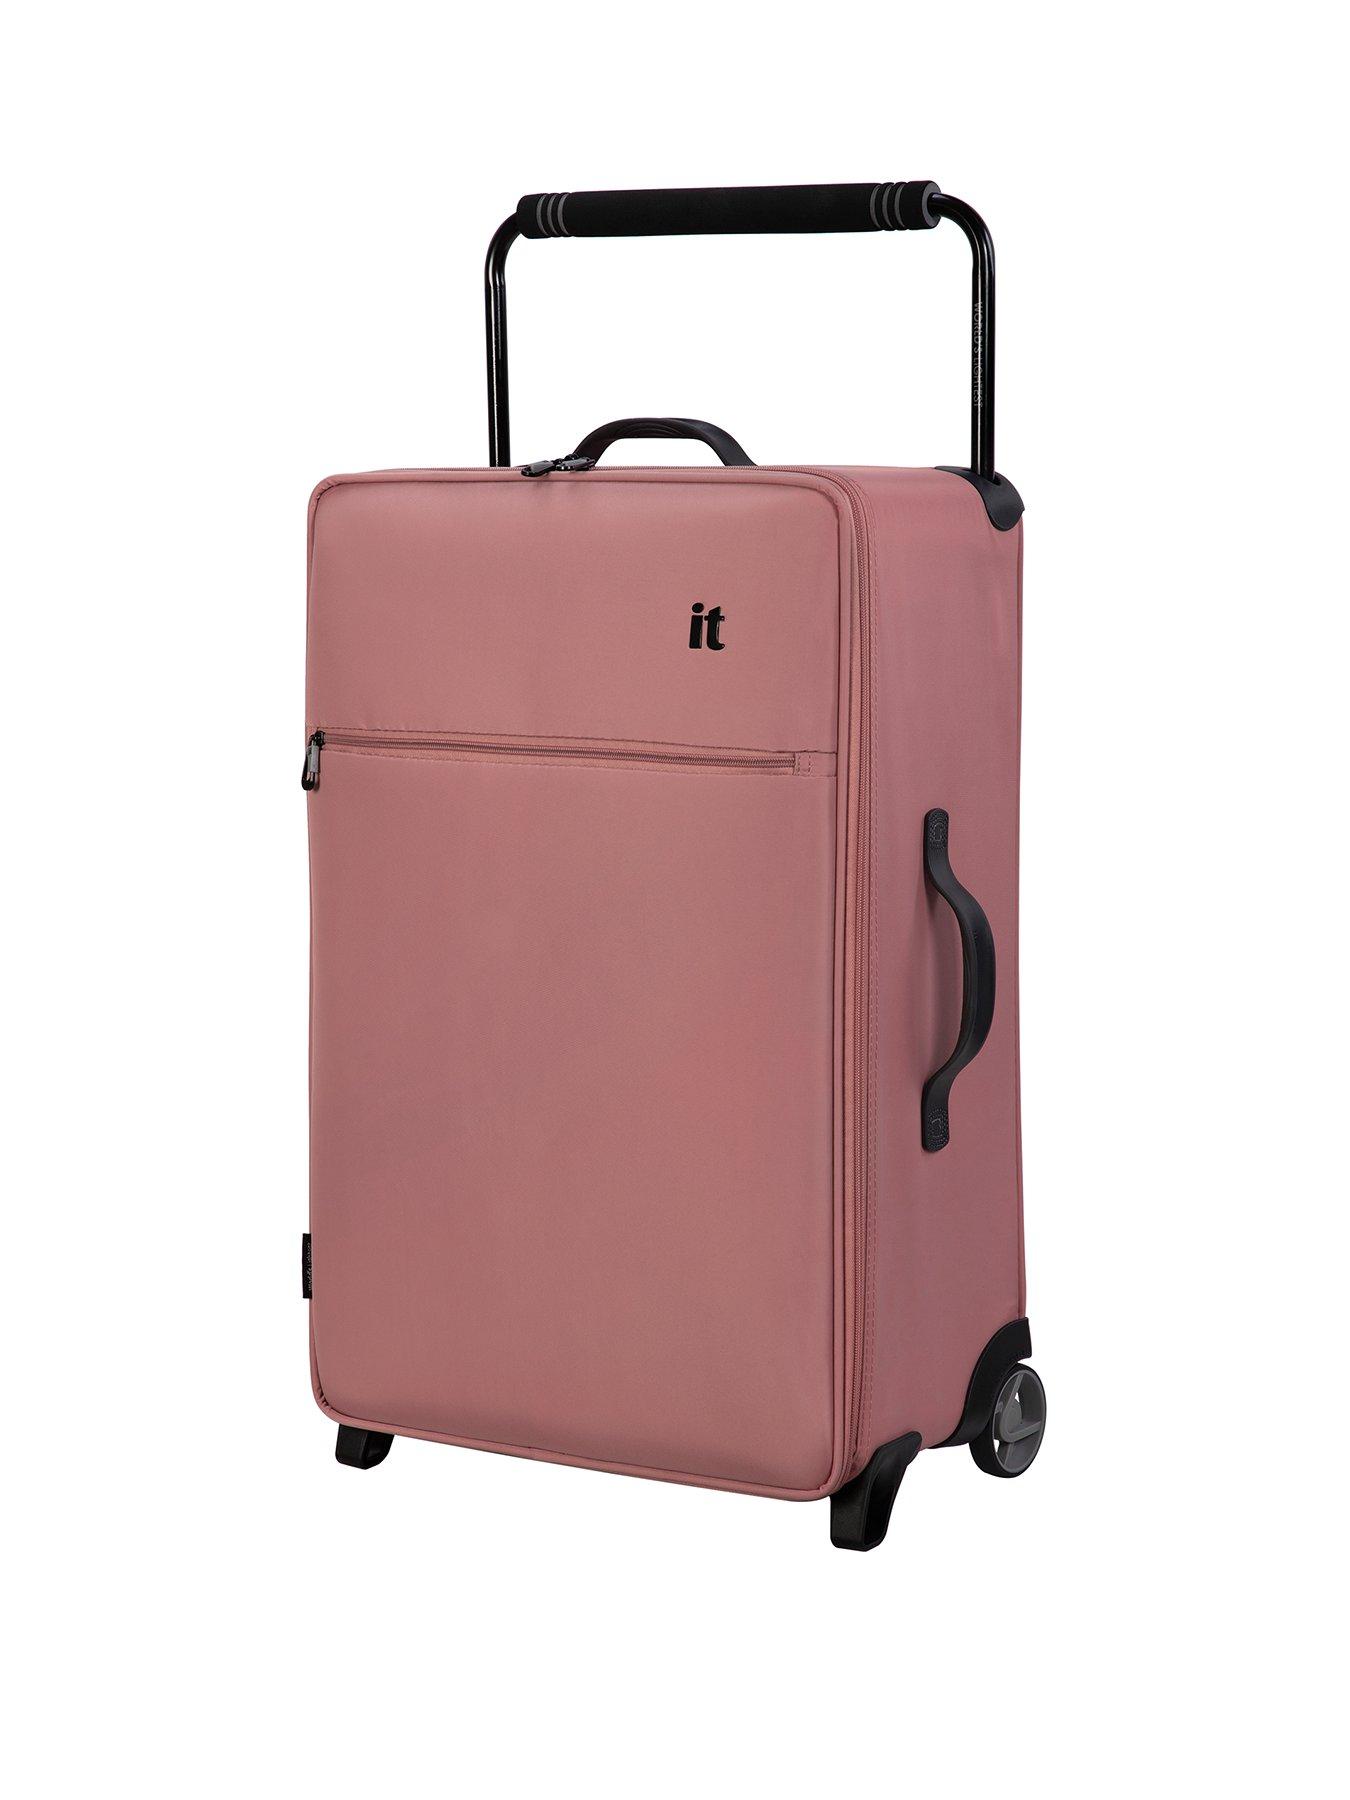 it Luggage Vitalize Medium Lightweight Suitcase - Pink Brown | very.co.uk